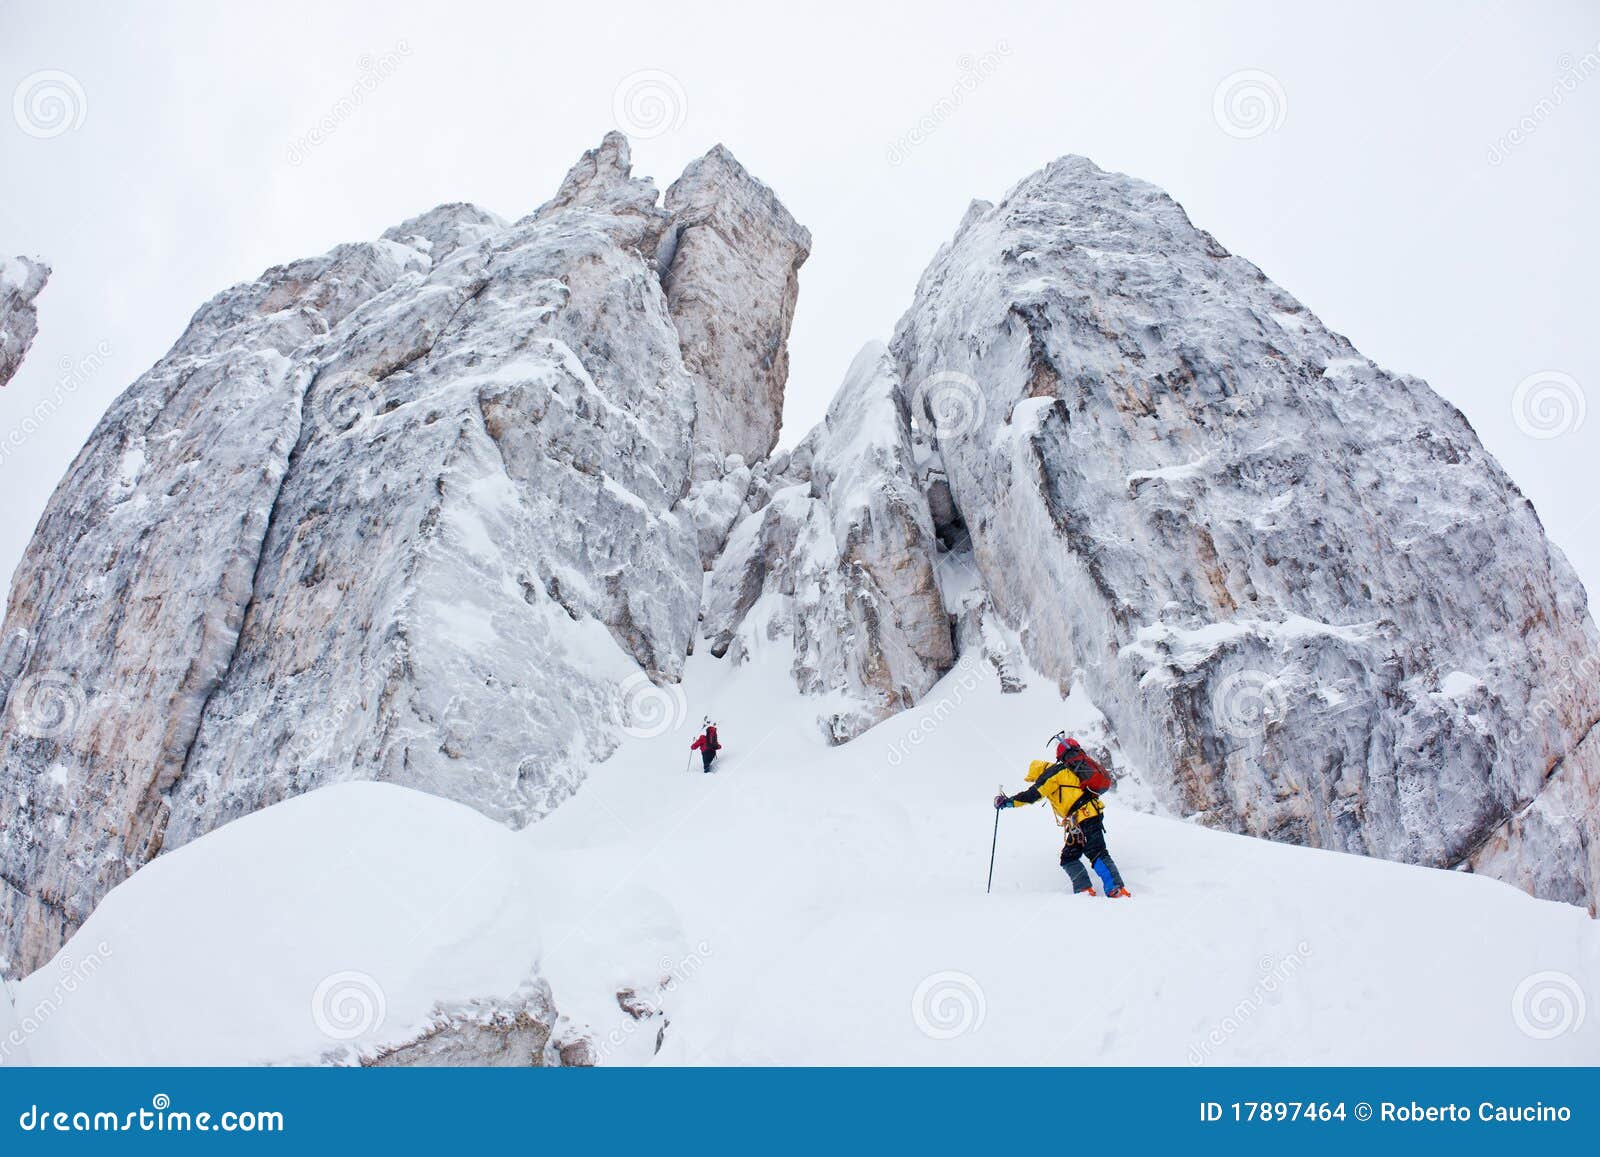 two climbers approach to a winter steep face